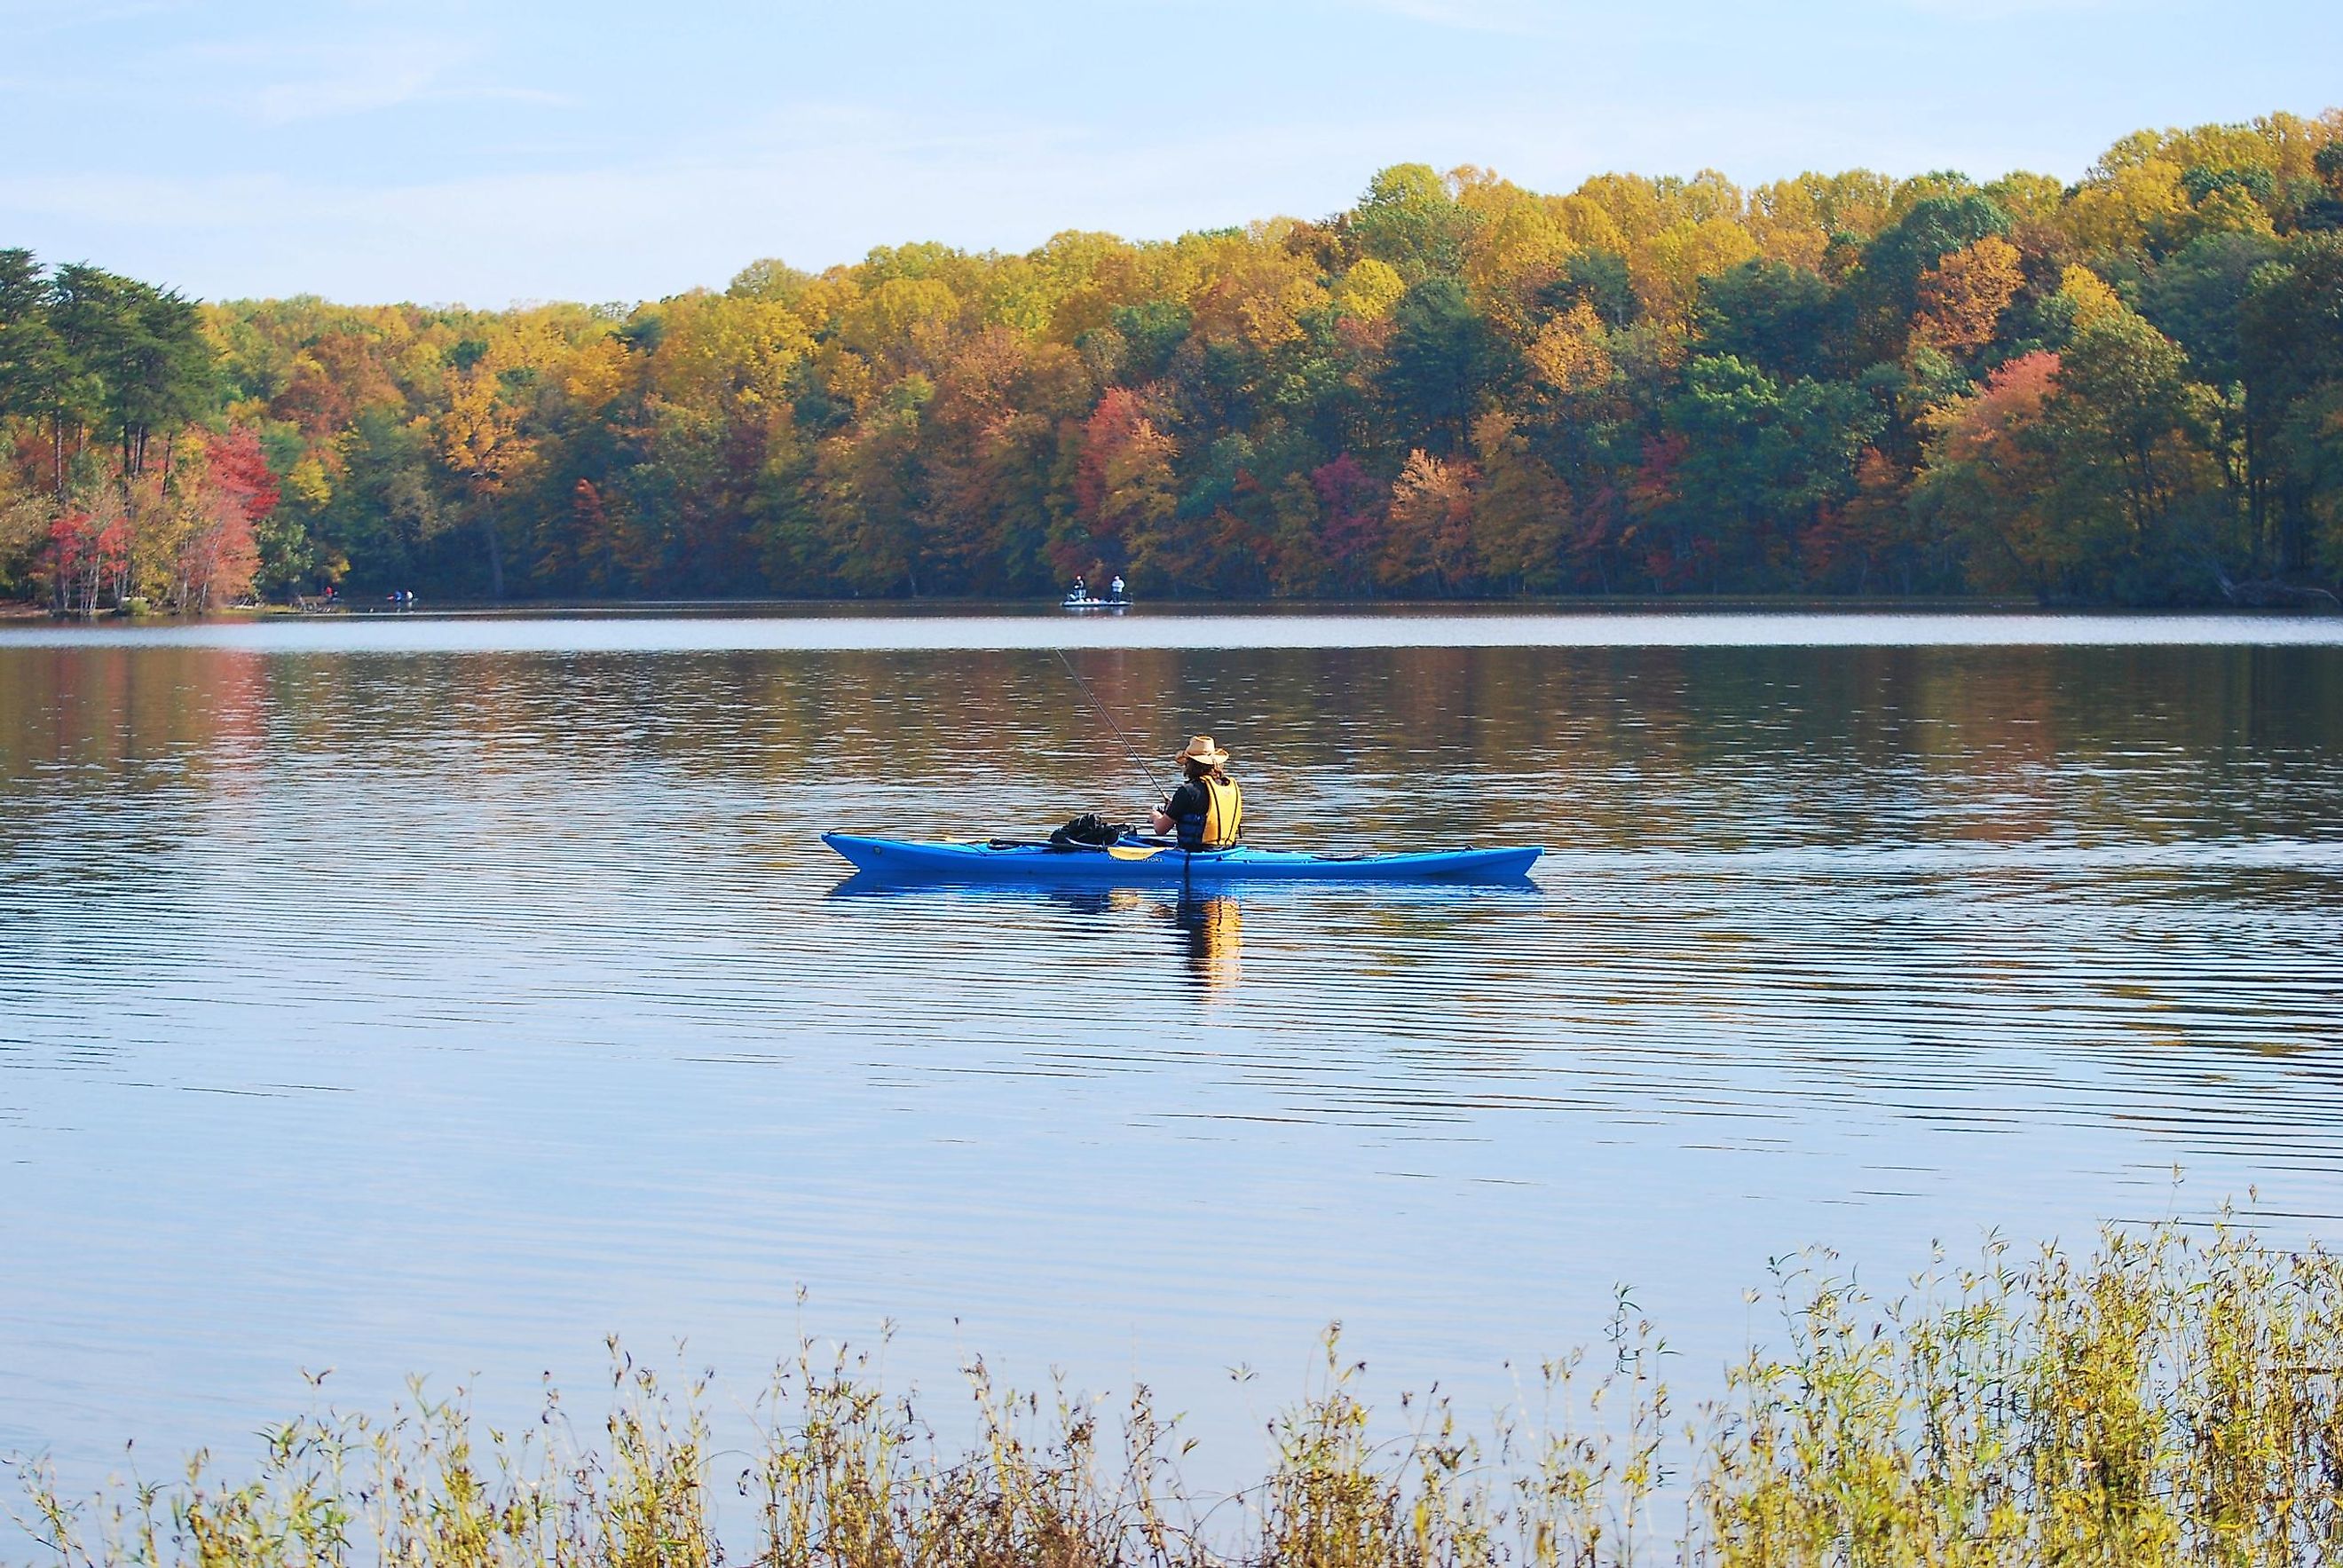 Man in a blue kayak in Burke Lake Virginia, with fall forest foliage around the lake.